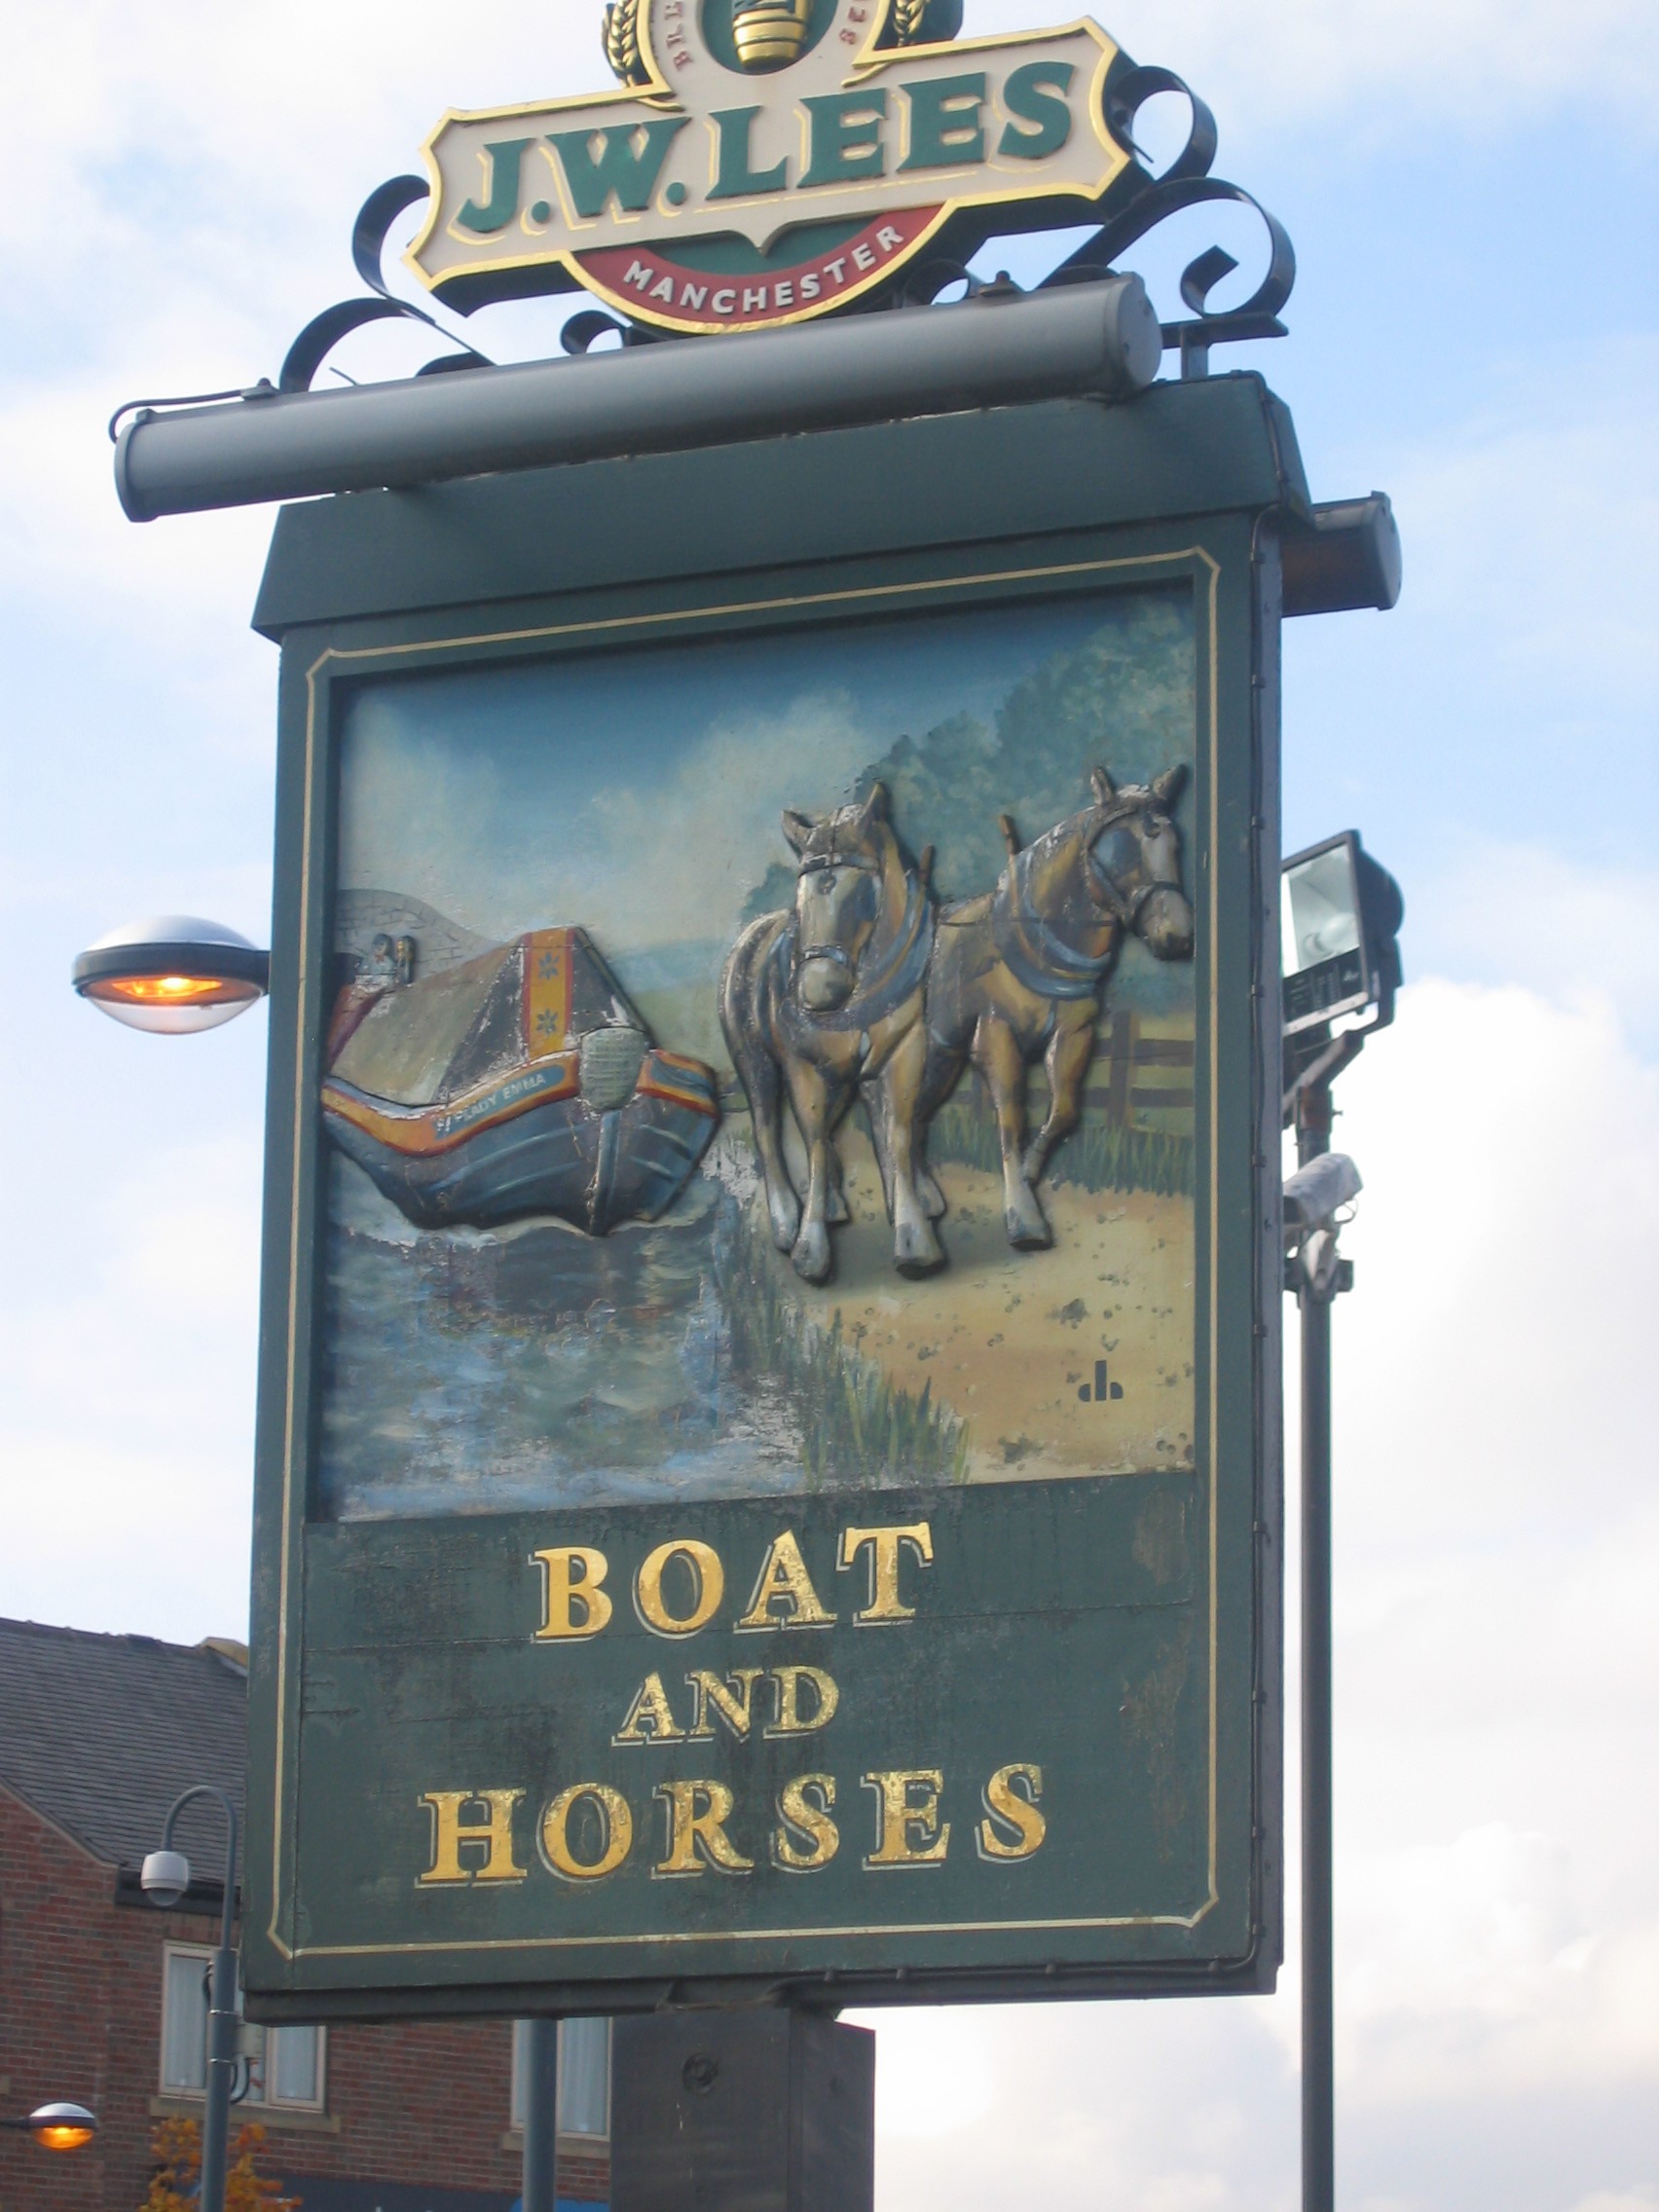 Photo taken by me - The Boat And Horses pub sign - Chadderton Manchester